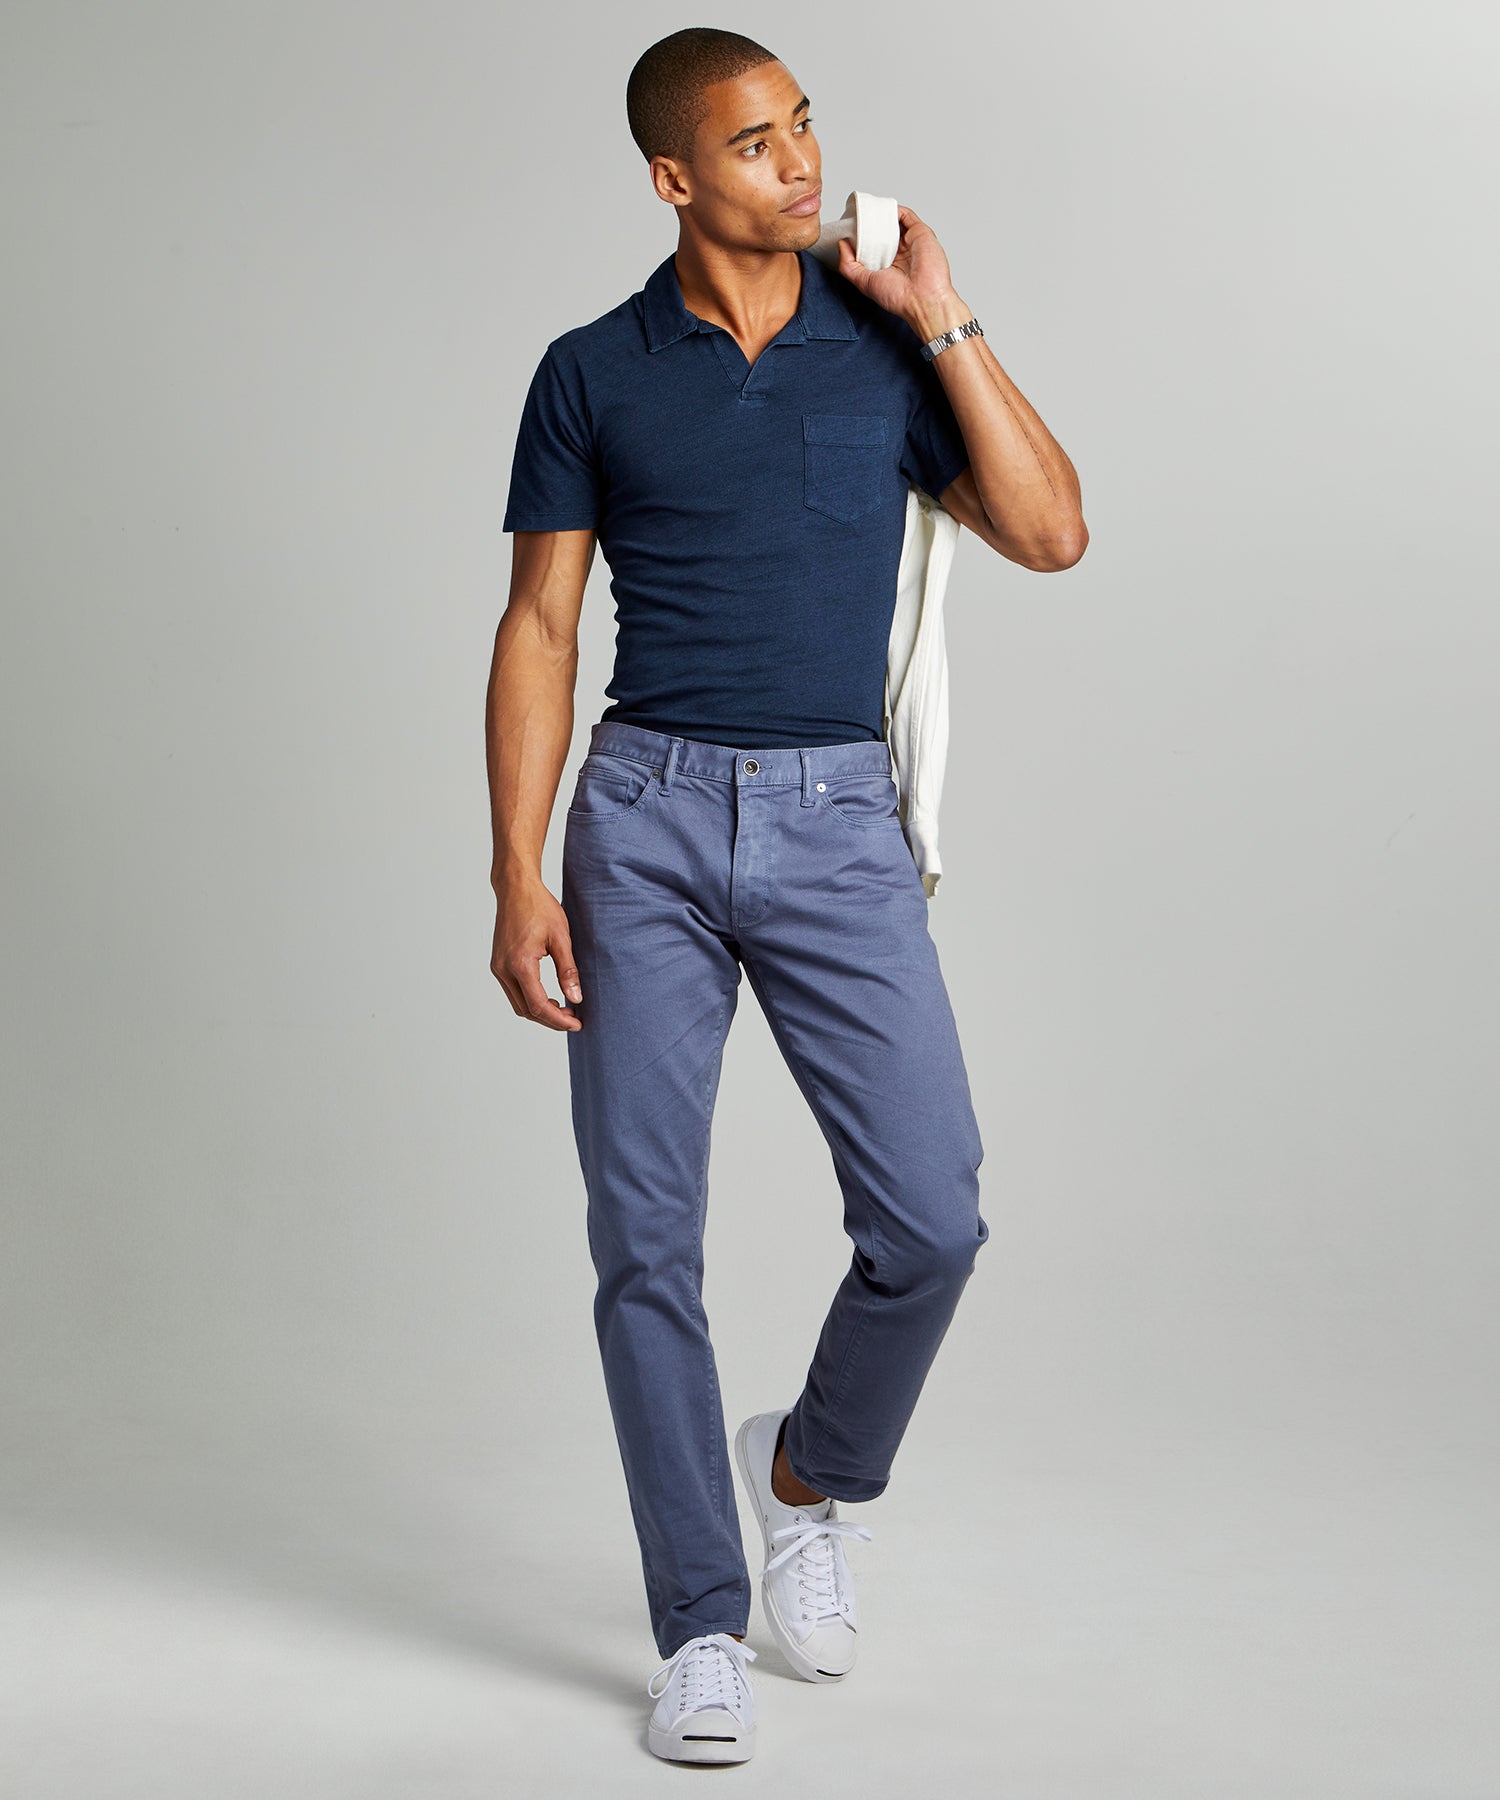 Image of Slim Fit 5-Pocket Garment-Dyed Stretch Twill in Cadet Blue